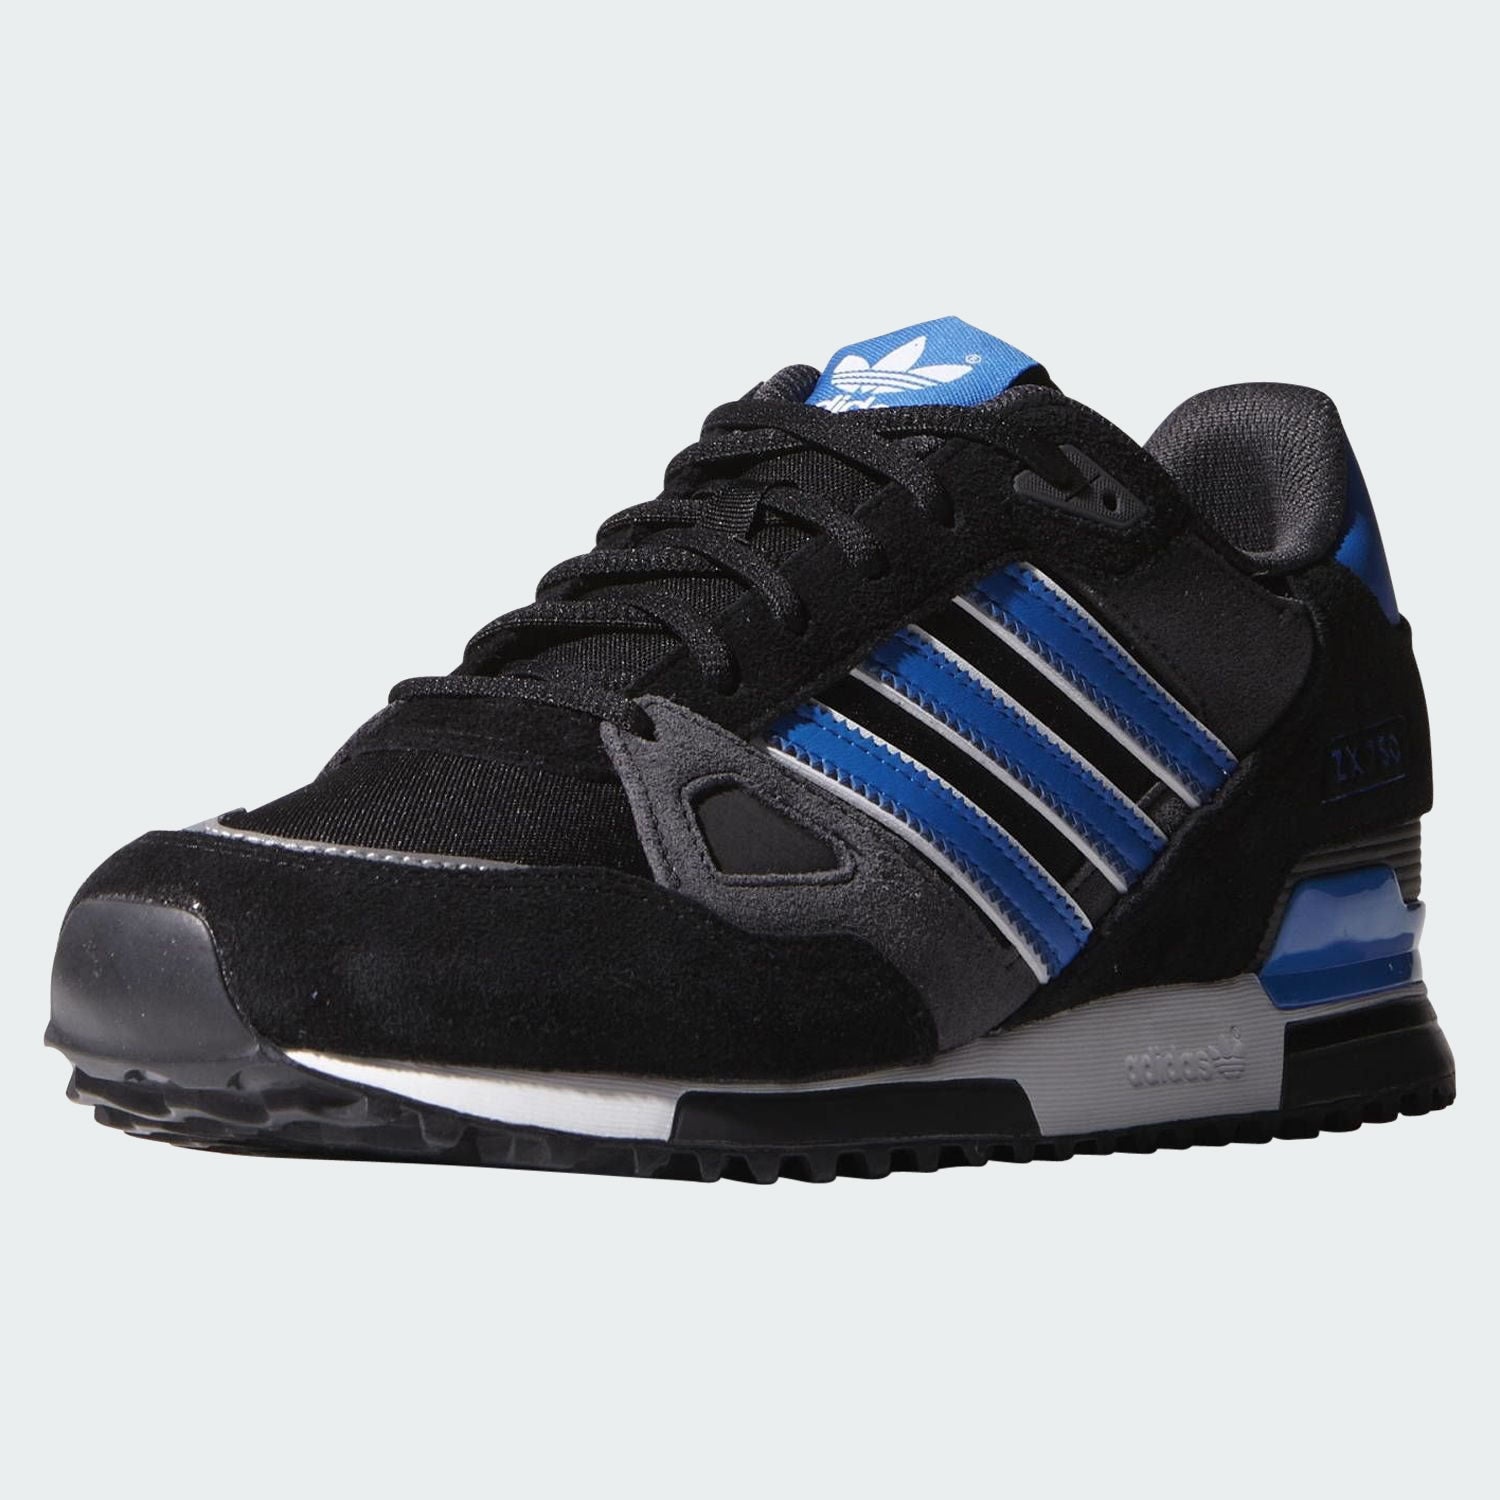 tradesports.co.uk Adidas Men's ZX 750 Trainers M18261